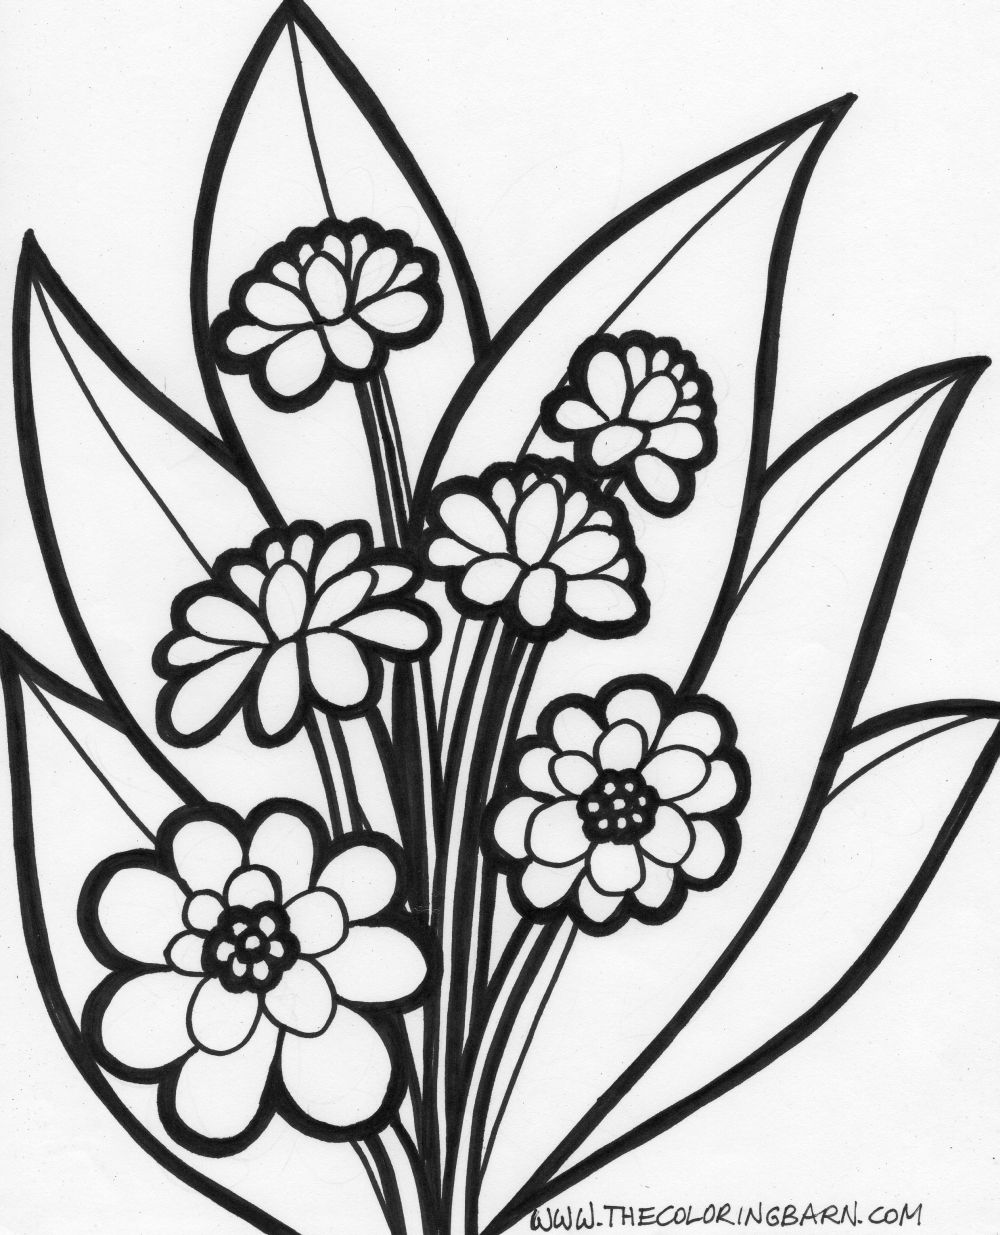  Flowers coloring pages | color printing | Flower | Coloring pages free | #25